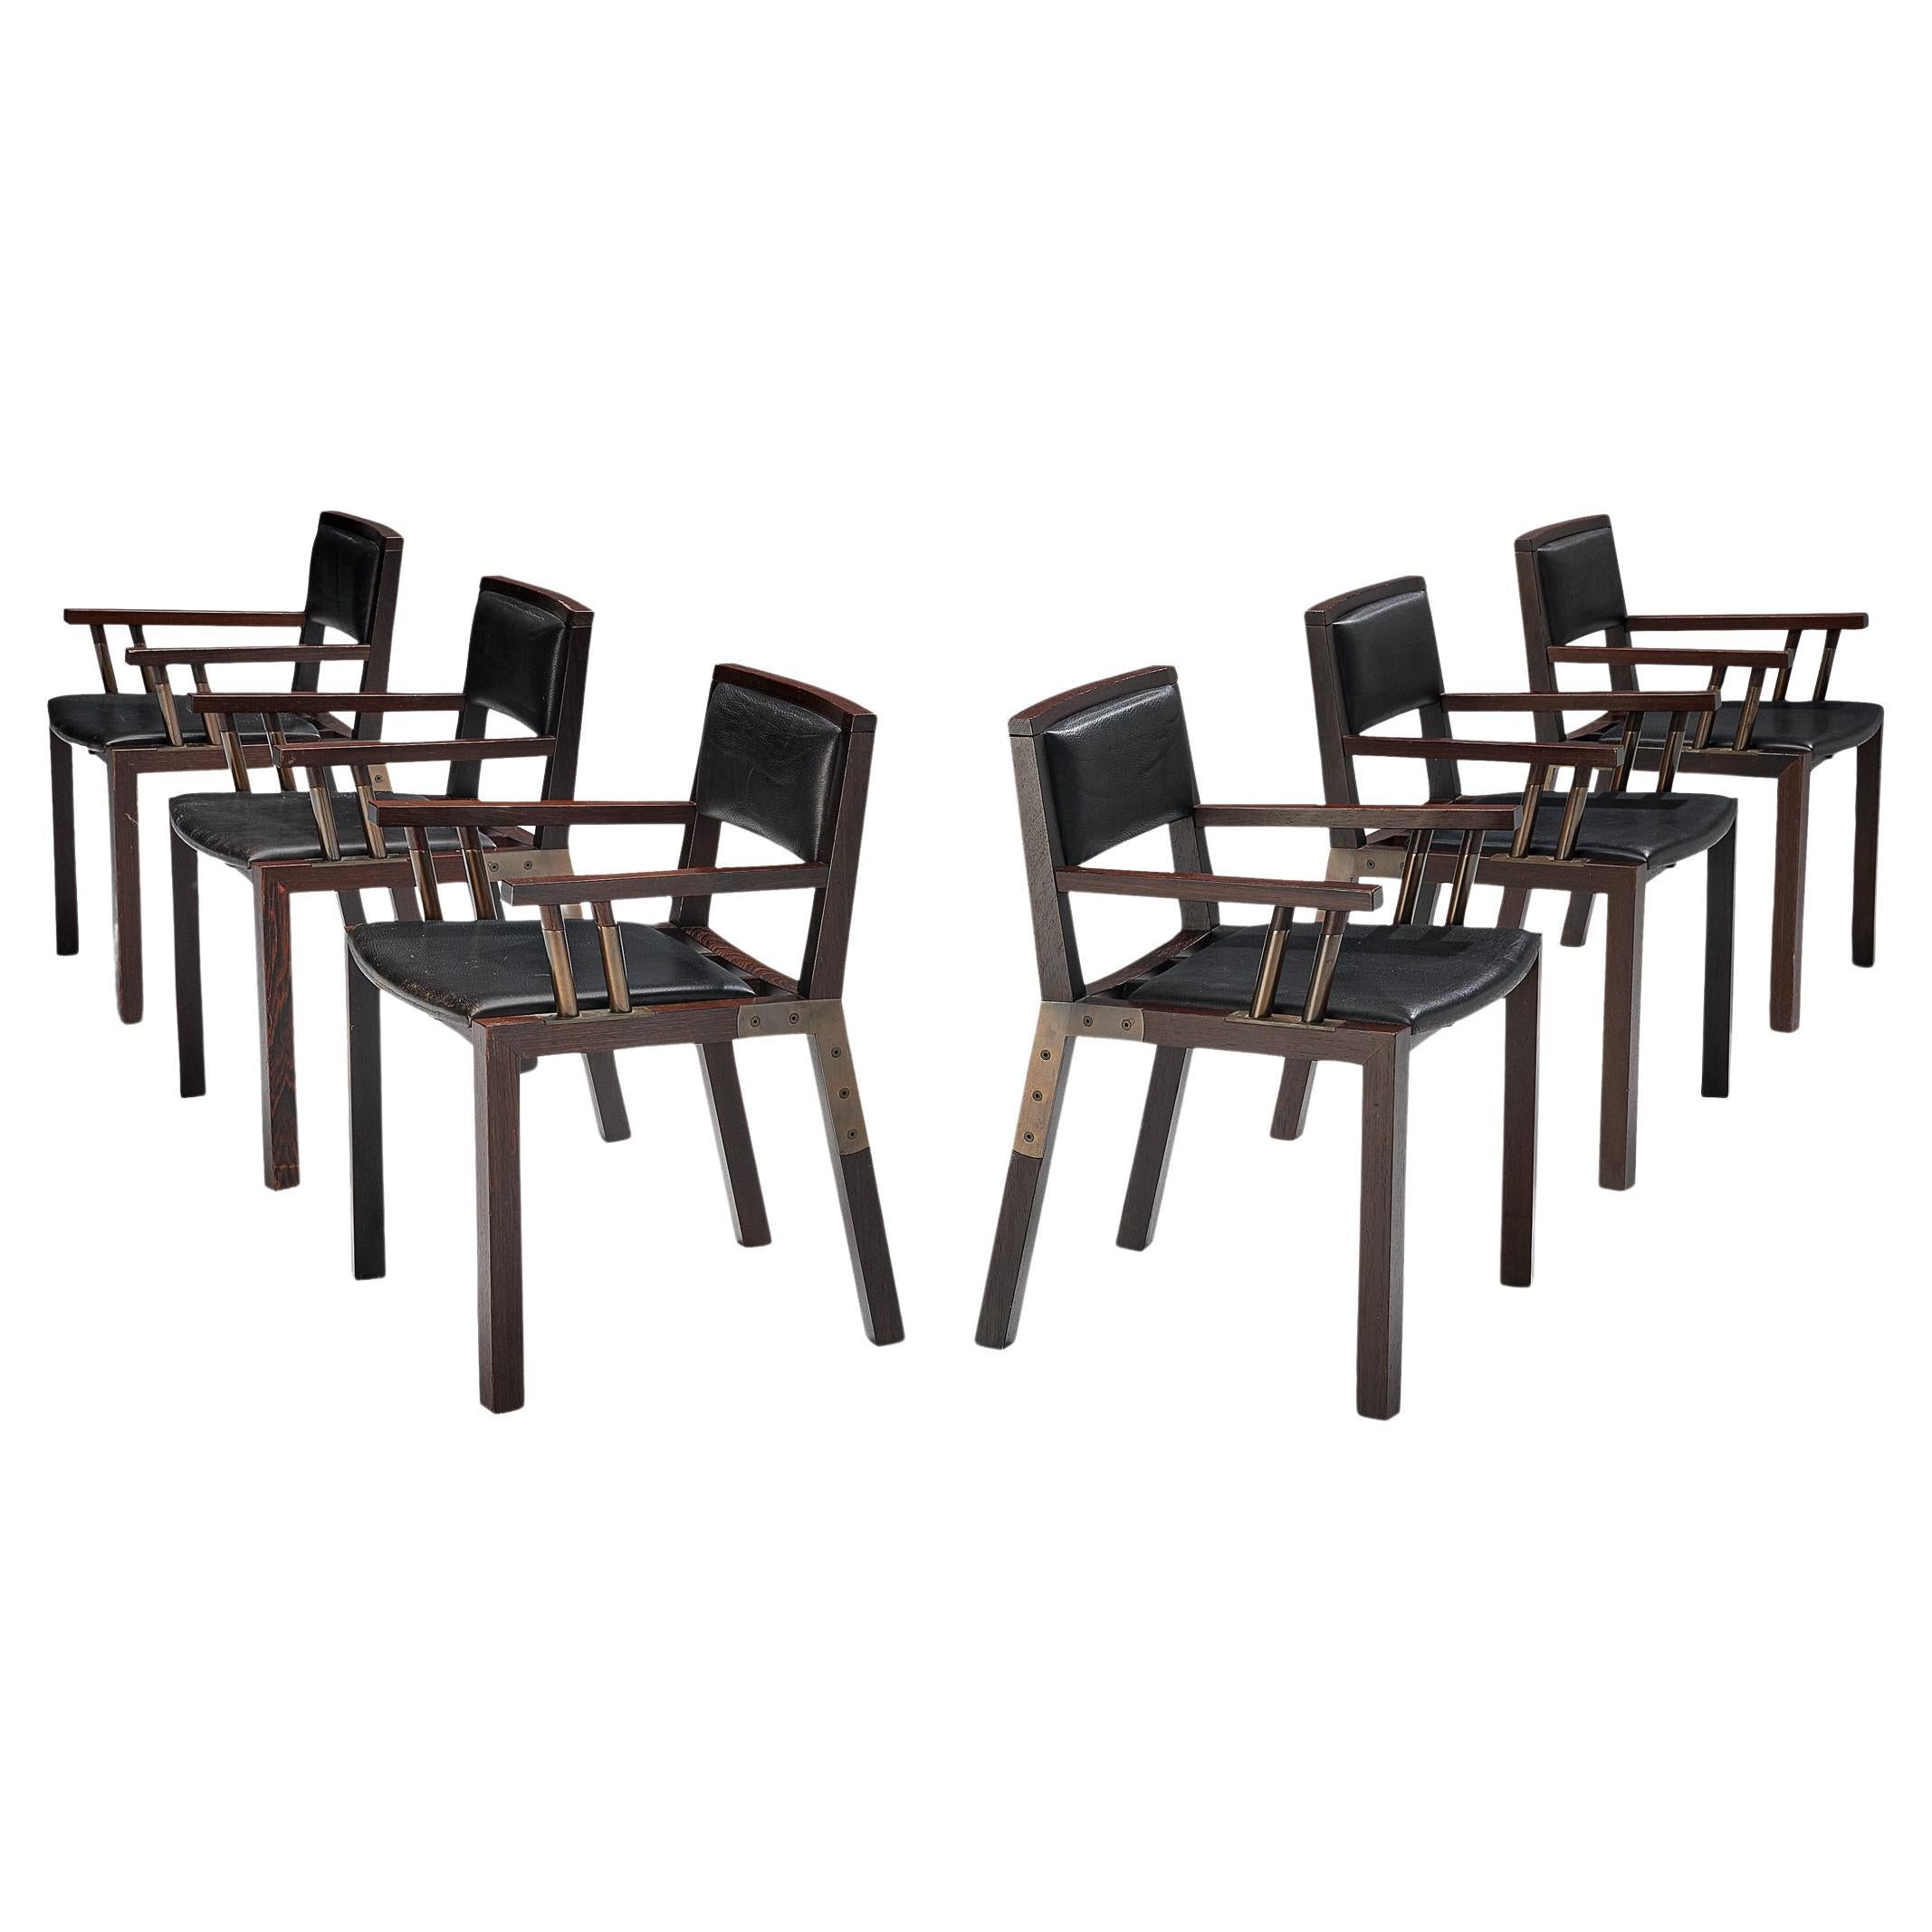 Rare Jean-Michel Wilmotte ‘Grand Louvre’ Set of Six Dining Chairs in Wenge  For Sale